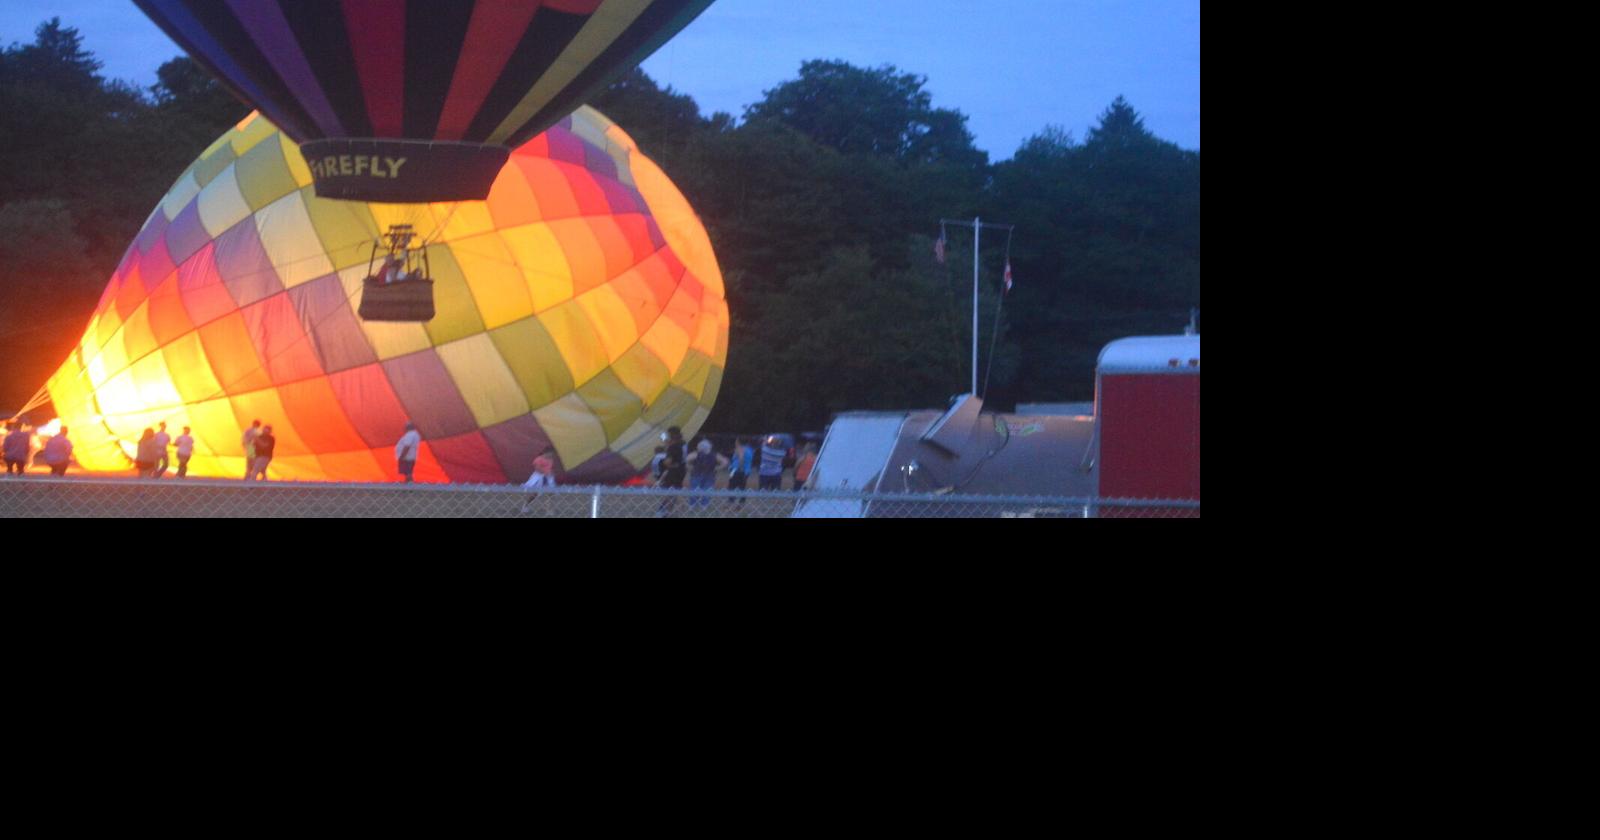 Good launches, crowd at Wellsville Balloon Rally 2022 New Balloon ENB